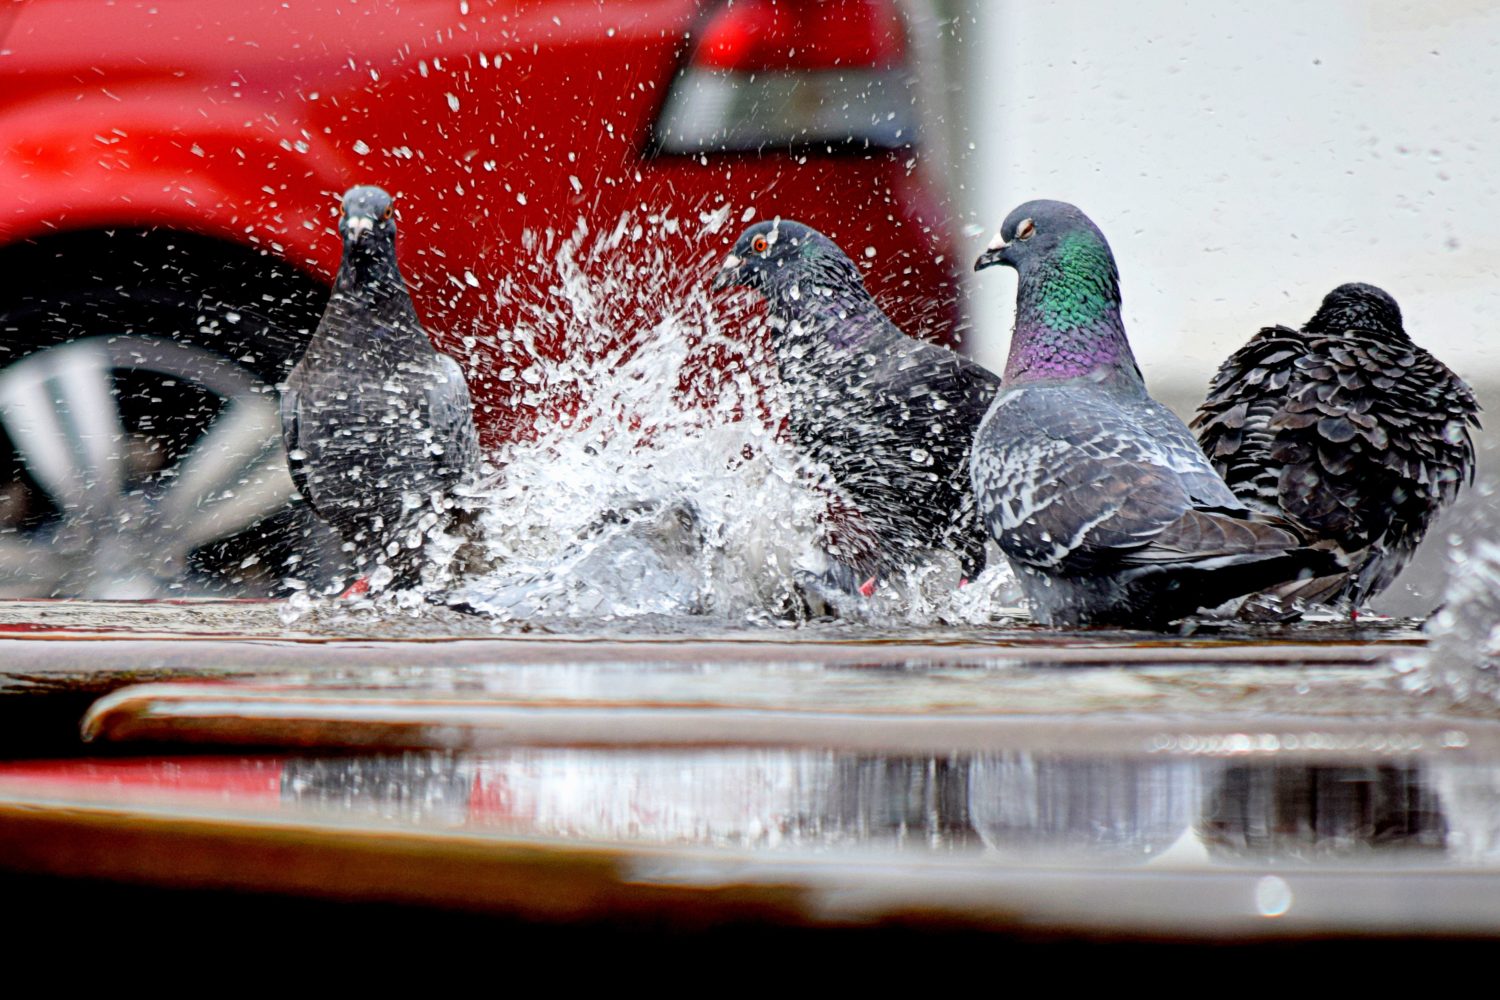 Pigeons splashing in a puddle by a red car